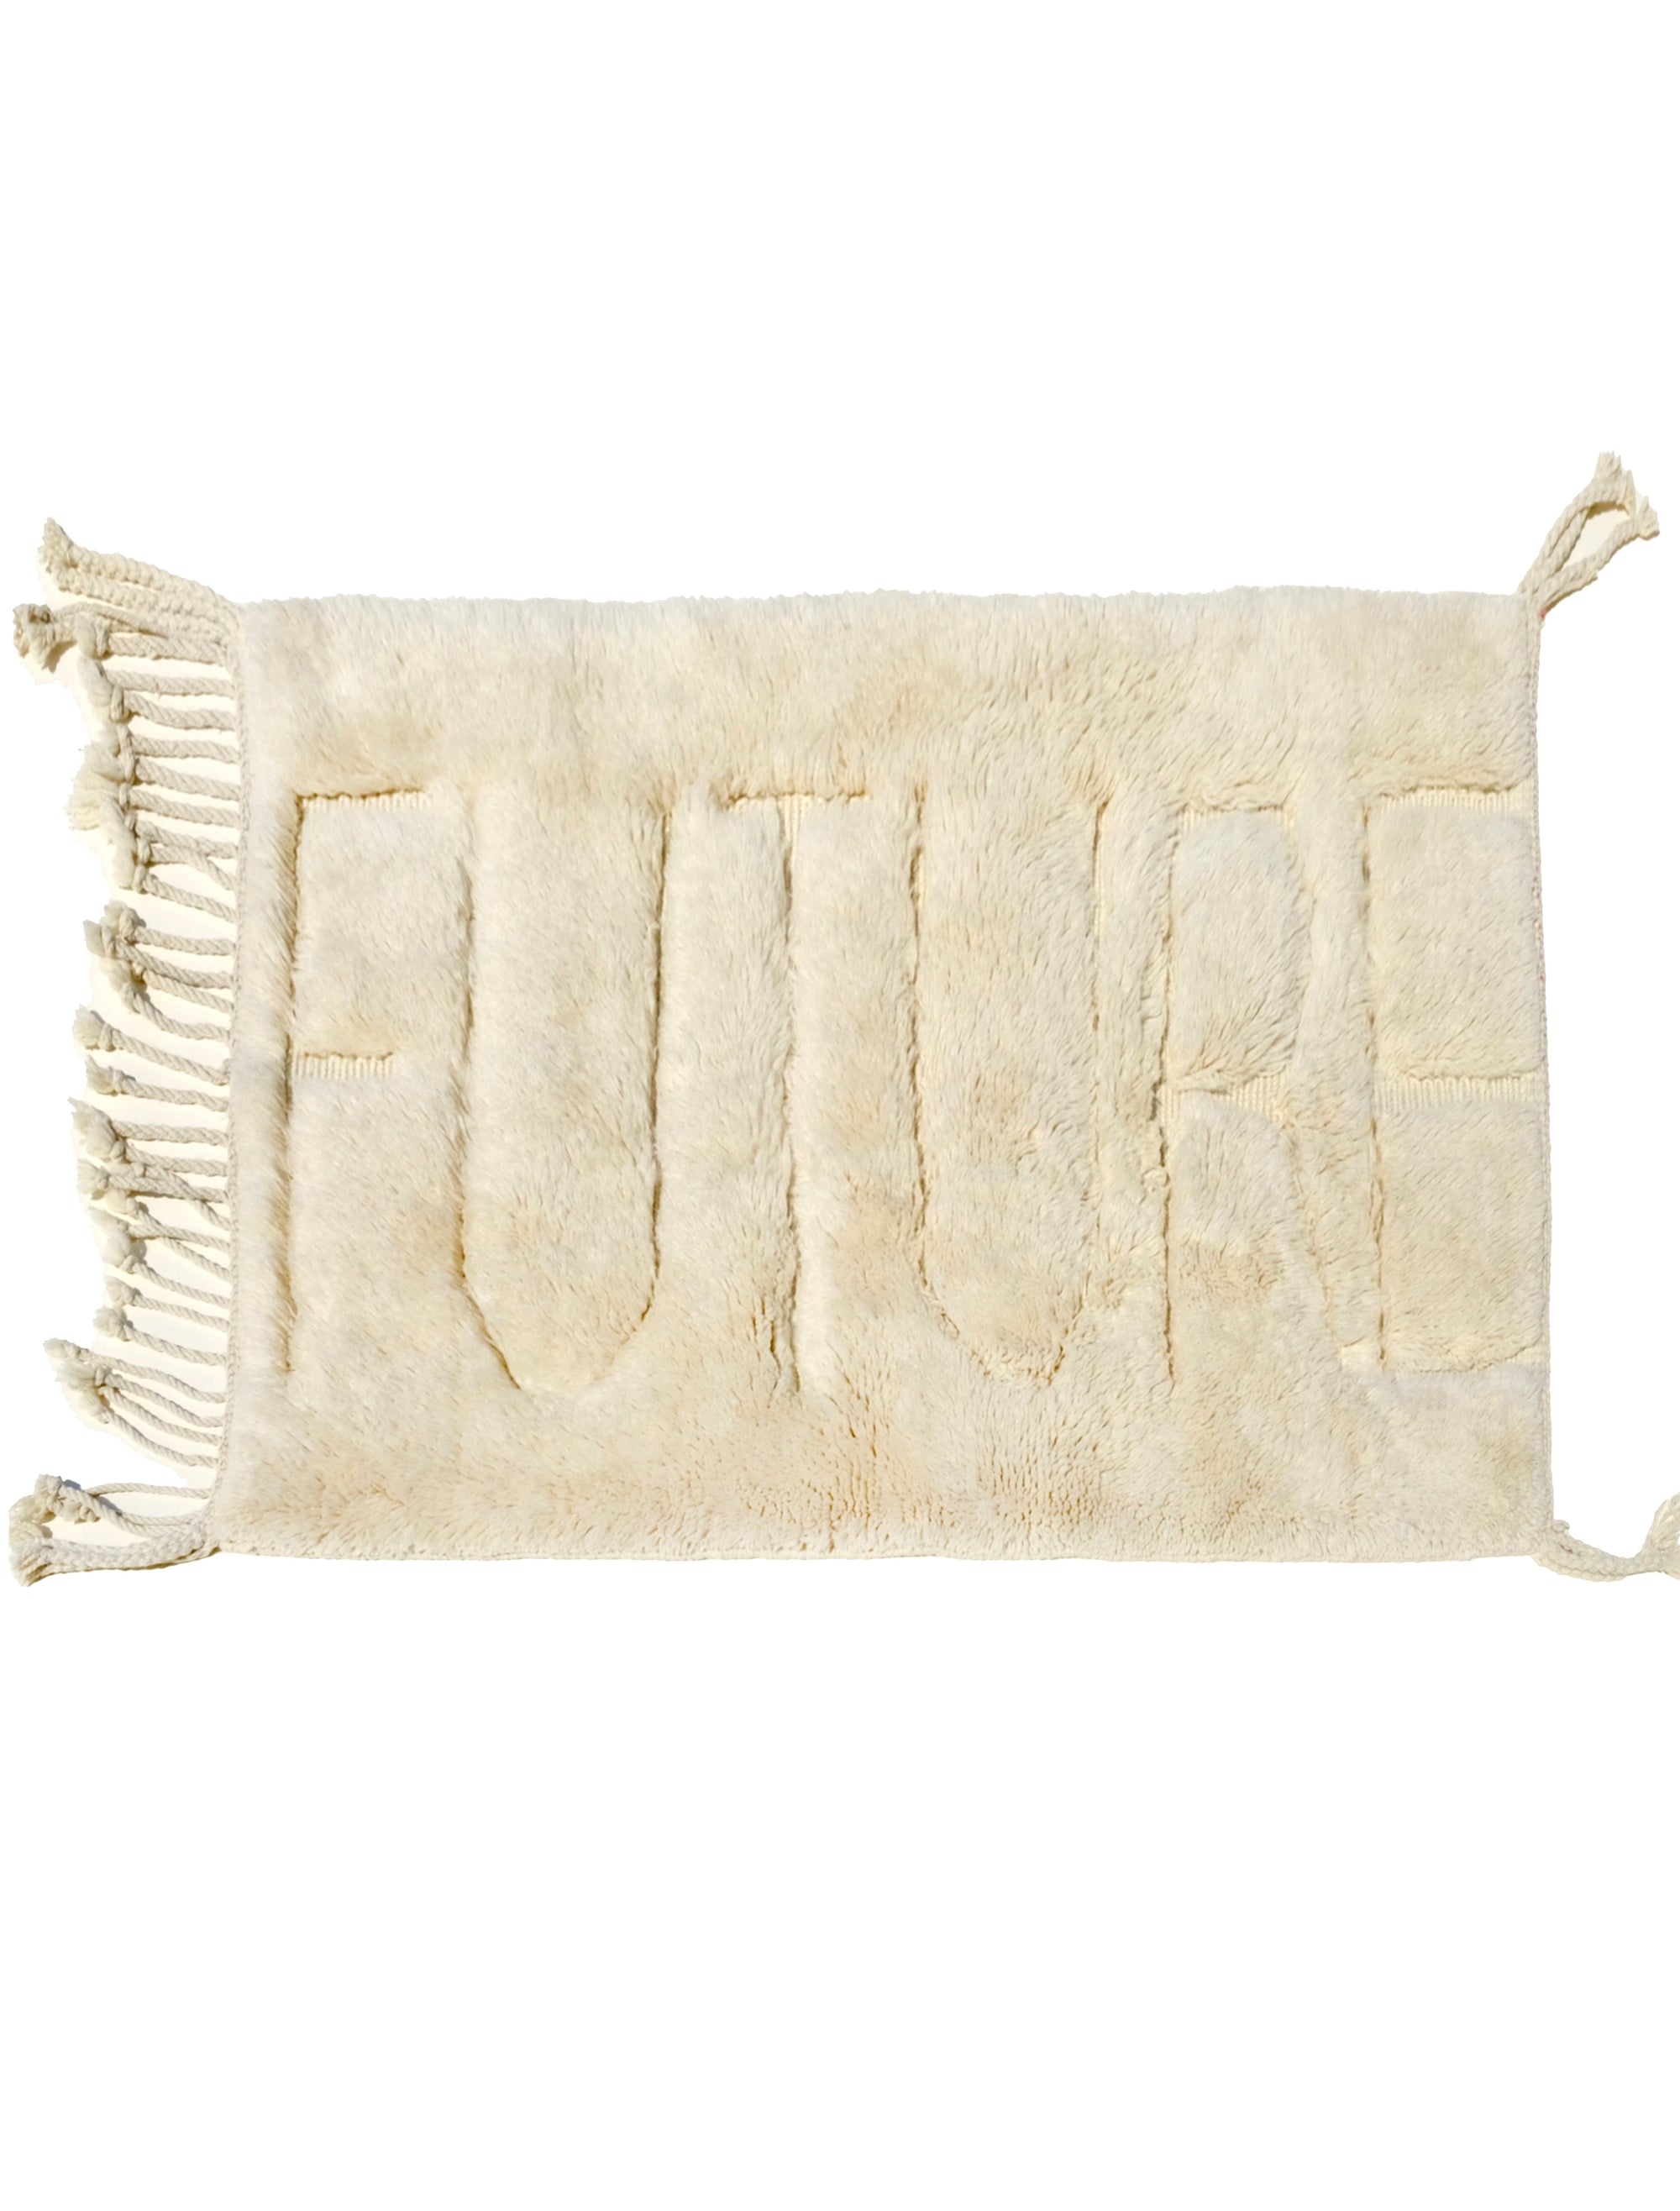 Elevate your space with our exquisite Ivory Enigma Future Rug. Crafted with classic elegance, this rug features a hidden 'Future' message subtly debossed into the luxurious fur. Discover a fusion of timeless style and contemporary intrigue, perfect for adding a touch of mystery to your décor